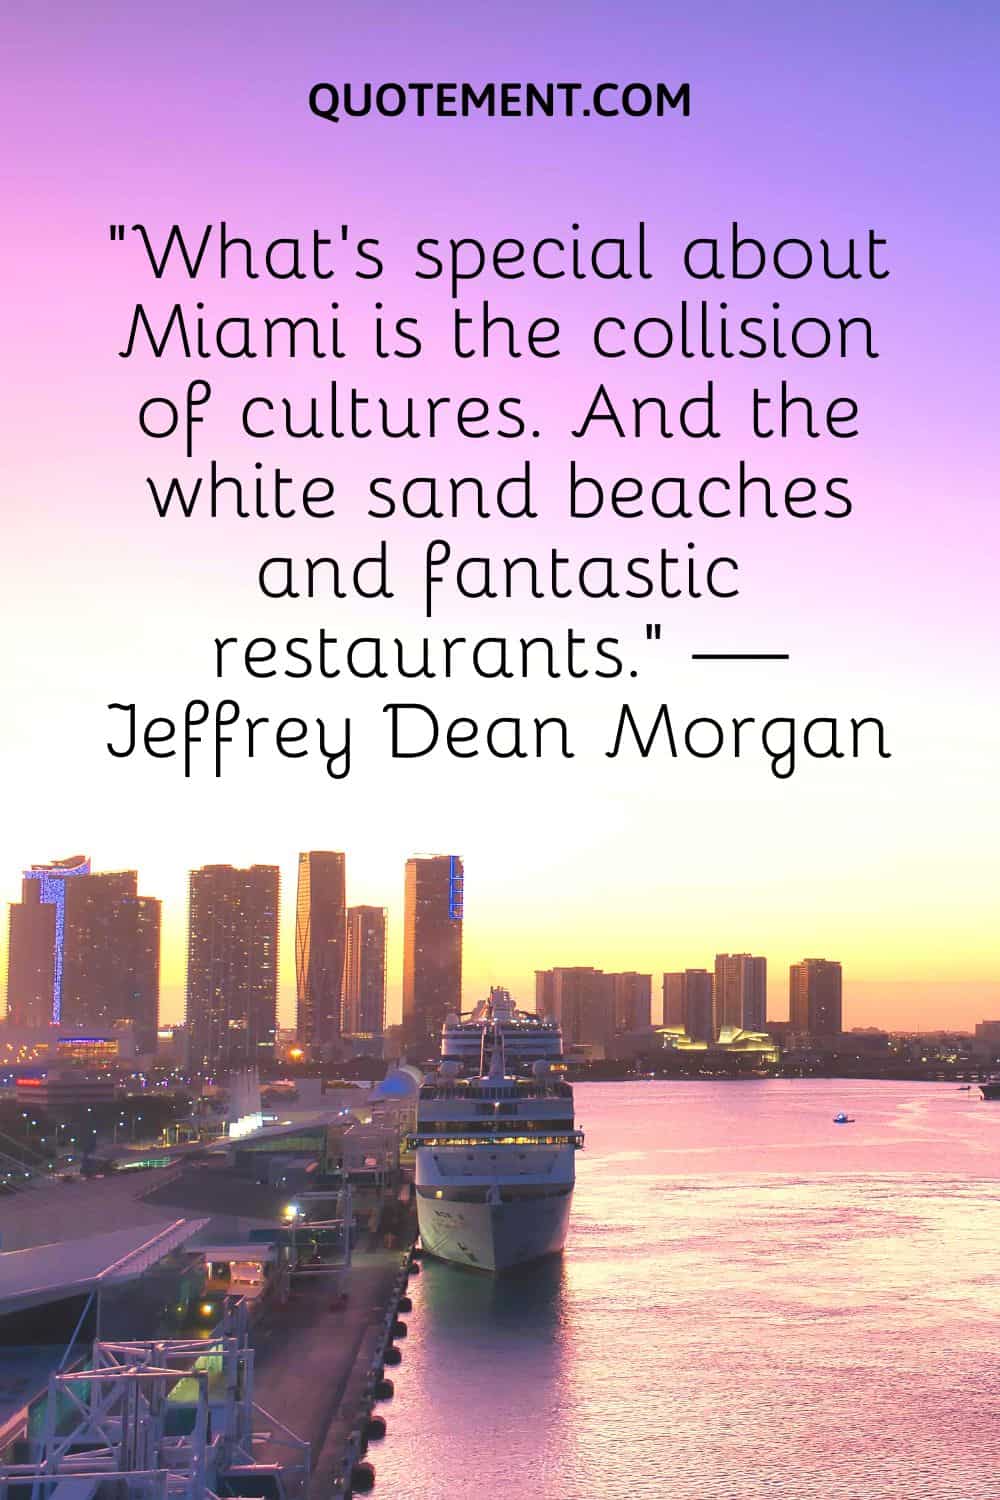 What’s special about Miami is the collision of cultures